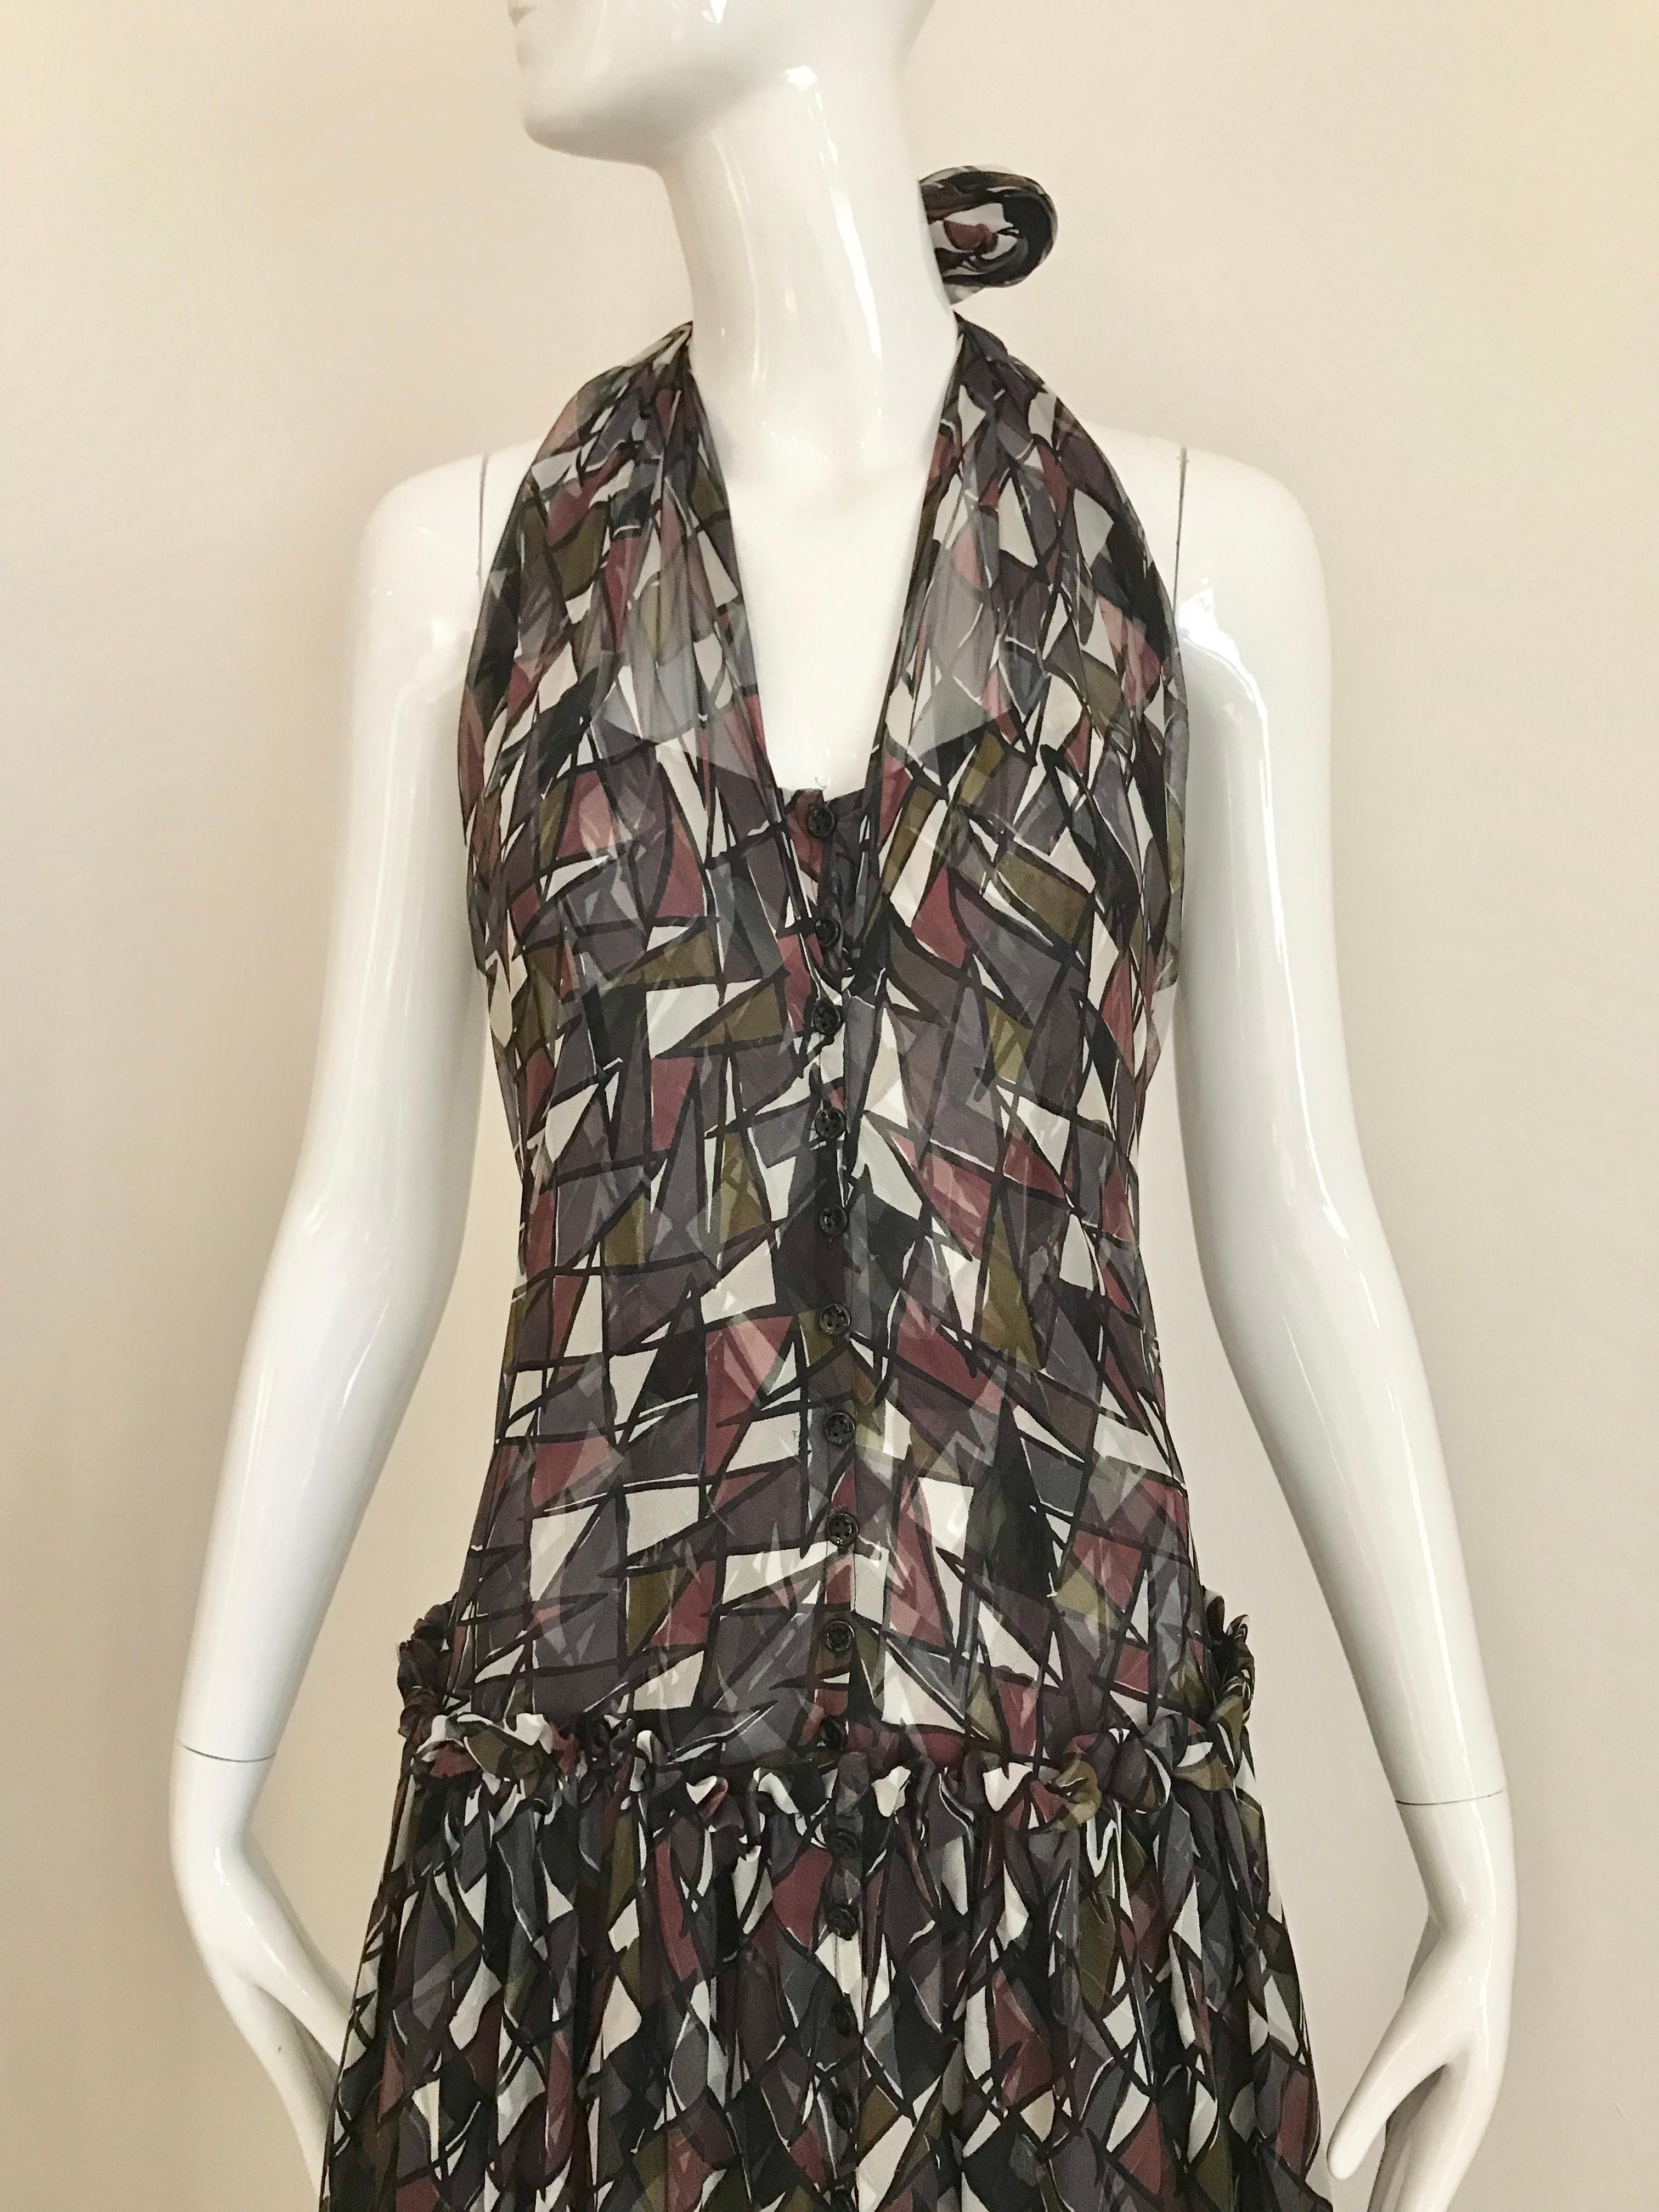 Yves Saint Laurent abstract print in charcoal Grey, red, green and white halter silk dress.
Size XS/2 
Button in the front and drop waist style.
Bust: 31 inches/ Waist: 28 inches / Hip: 34 inches/ Dress length: 50 inches